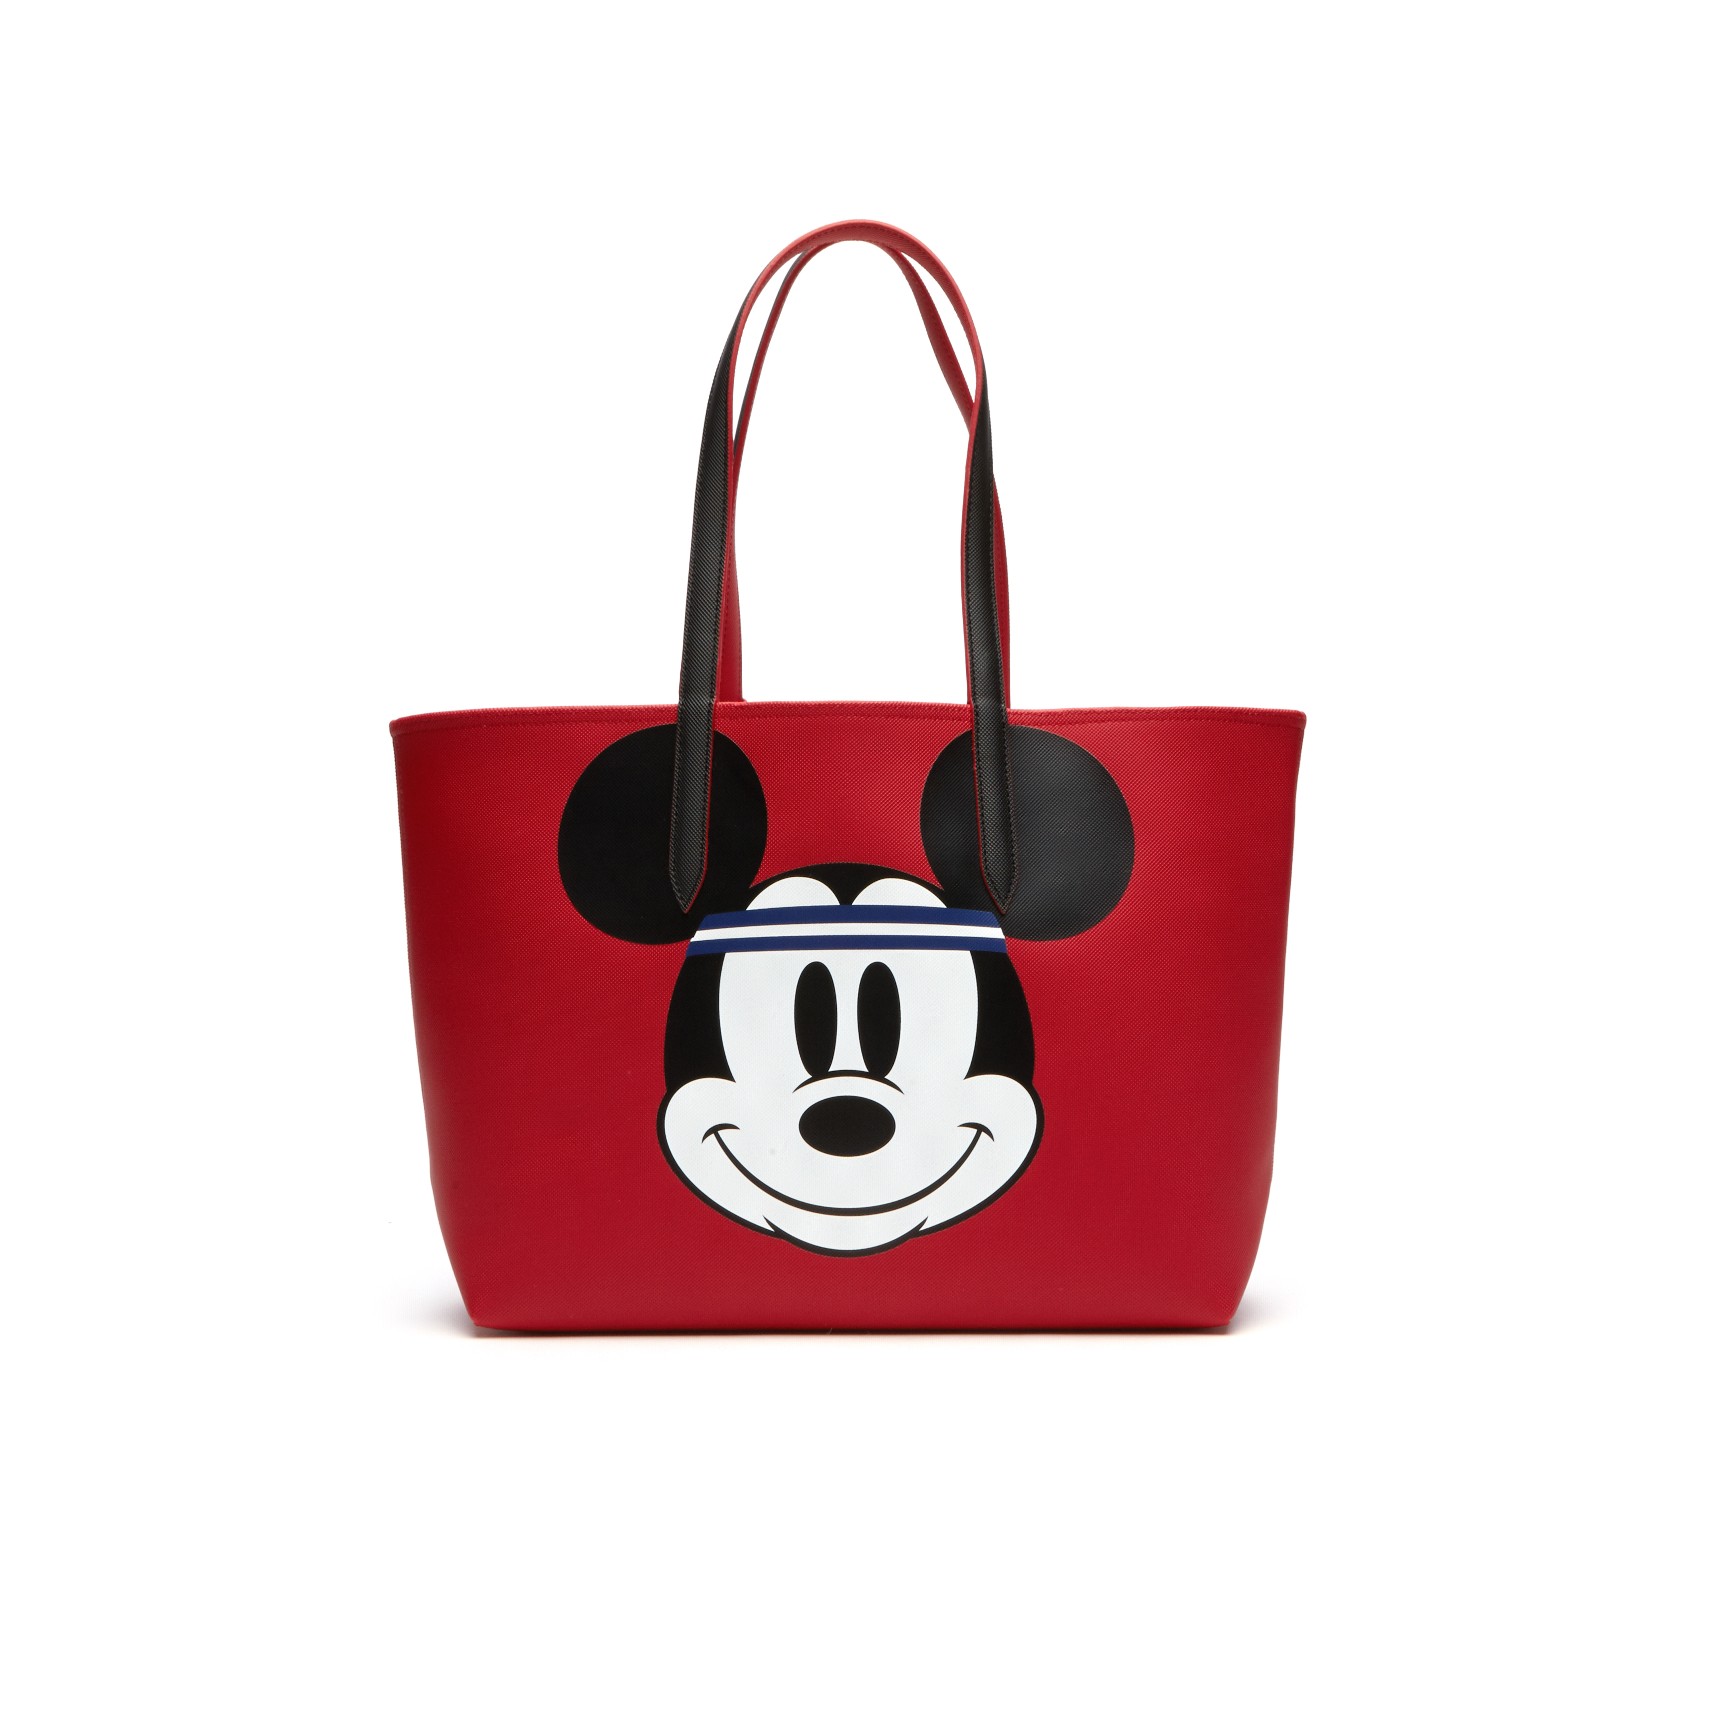 lacoste bag mickey mouse